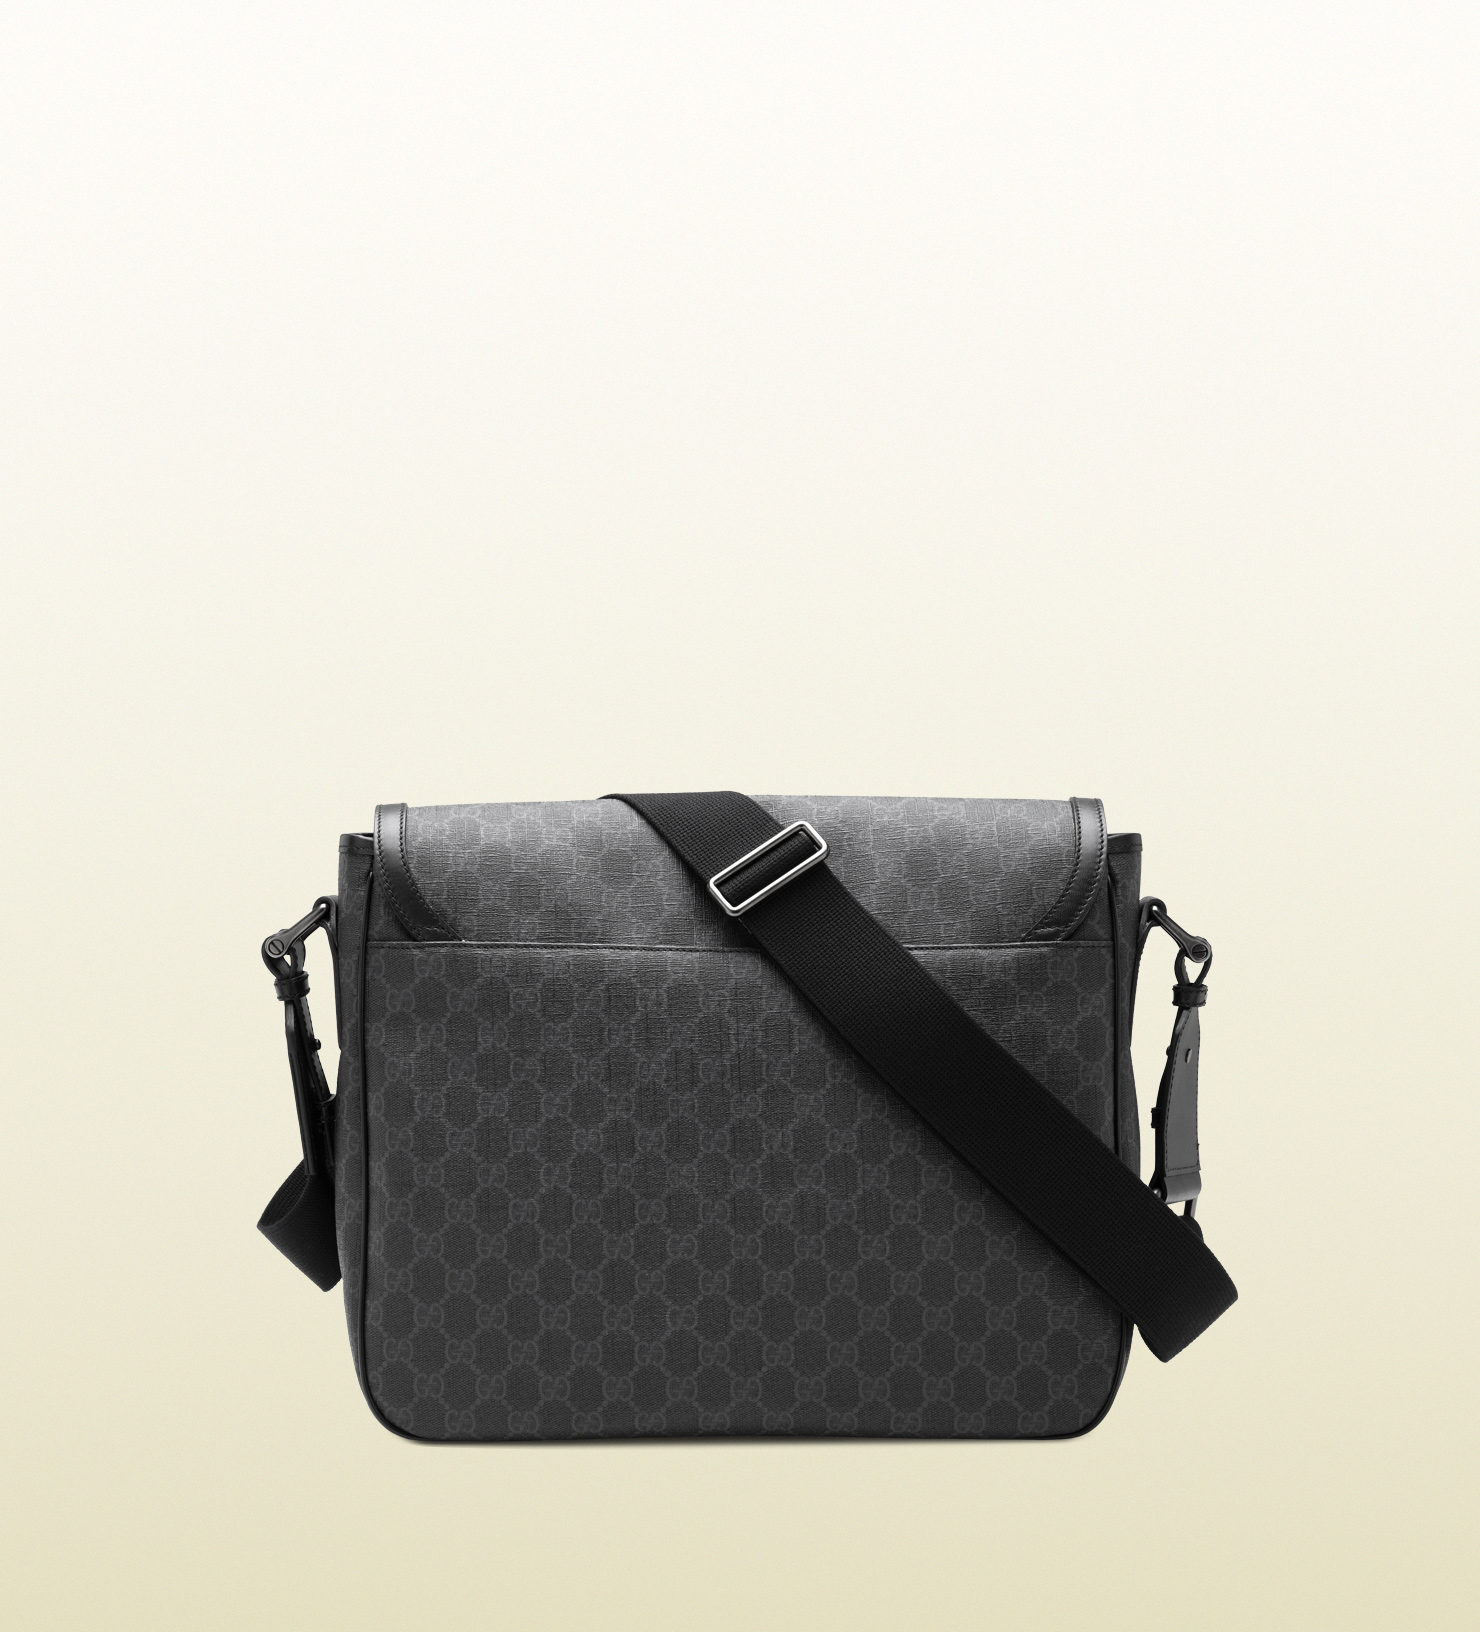 Gucci Gg Supreme Canvas Messenger Bag in Grey (Gray) for Men - Lyst